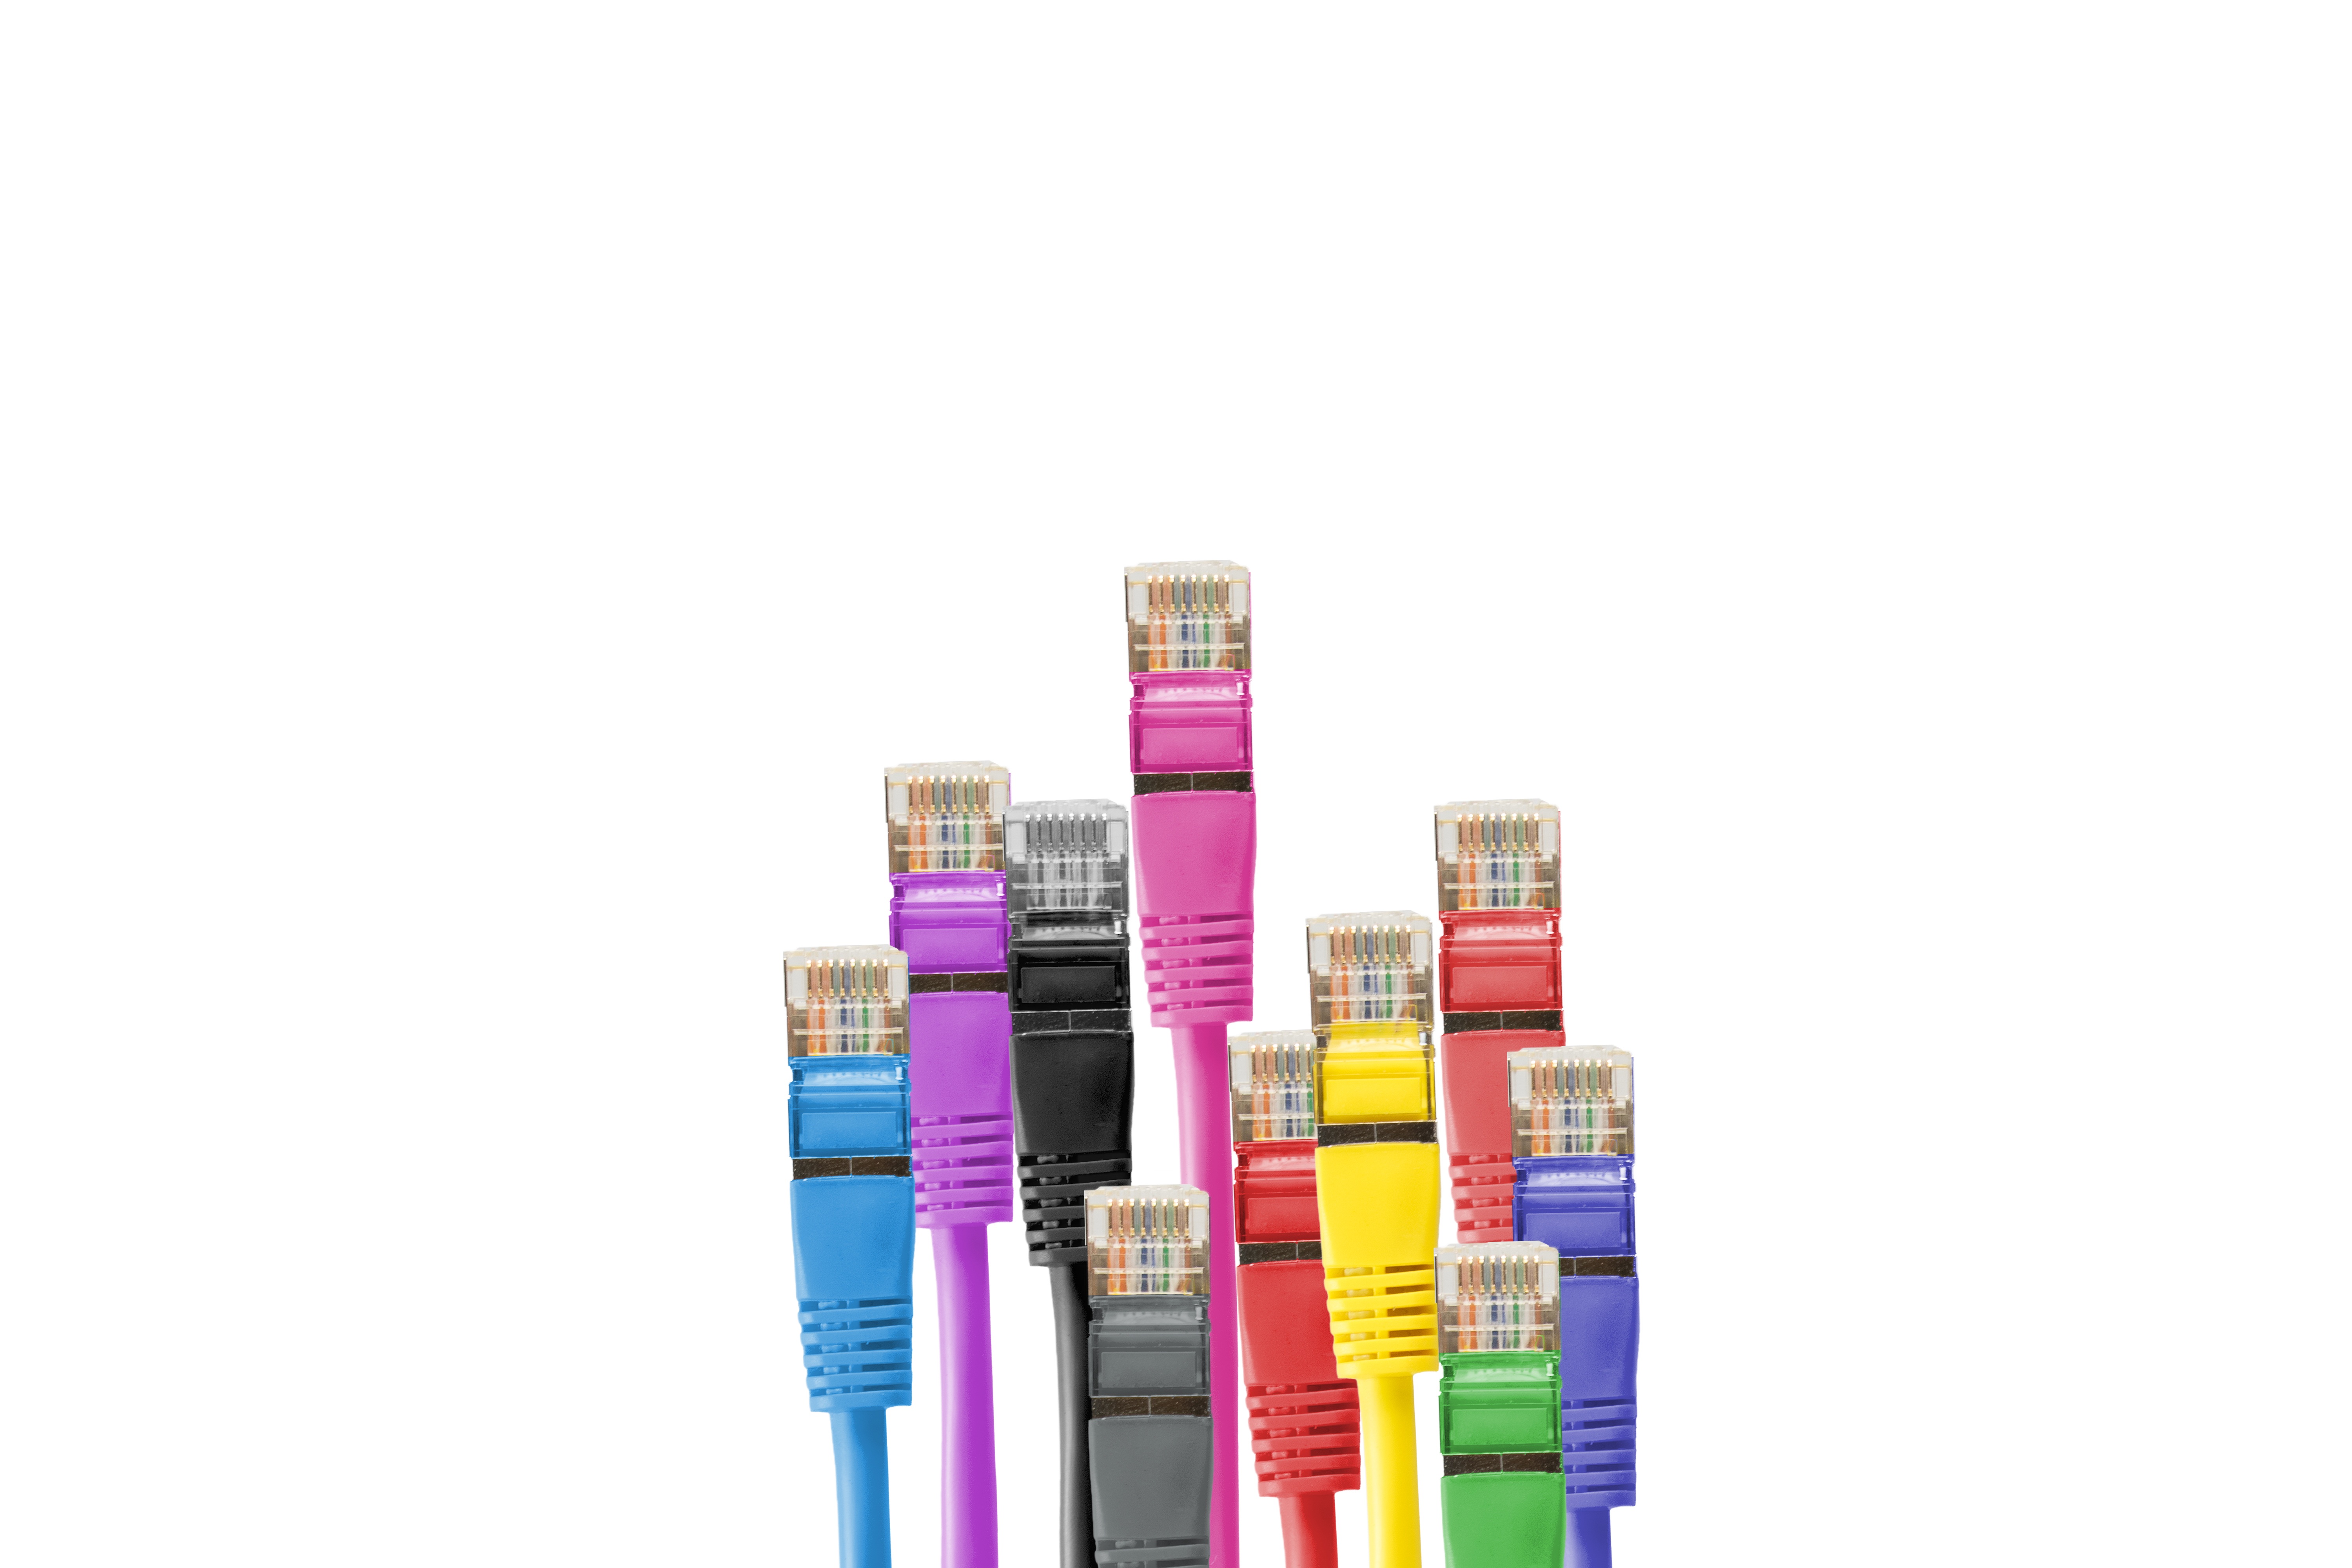 A set of network cables